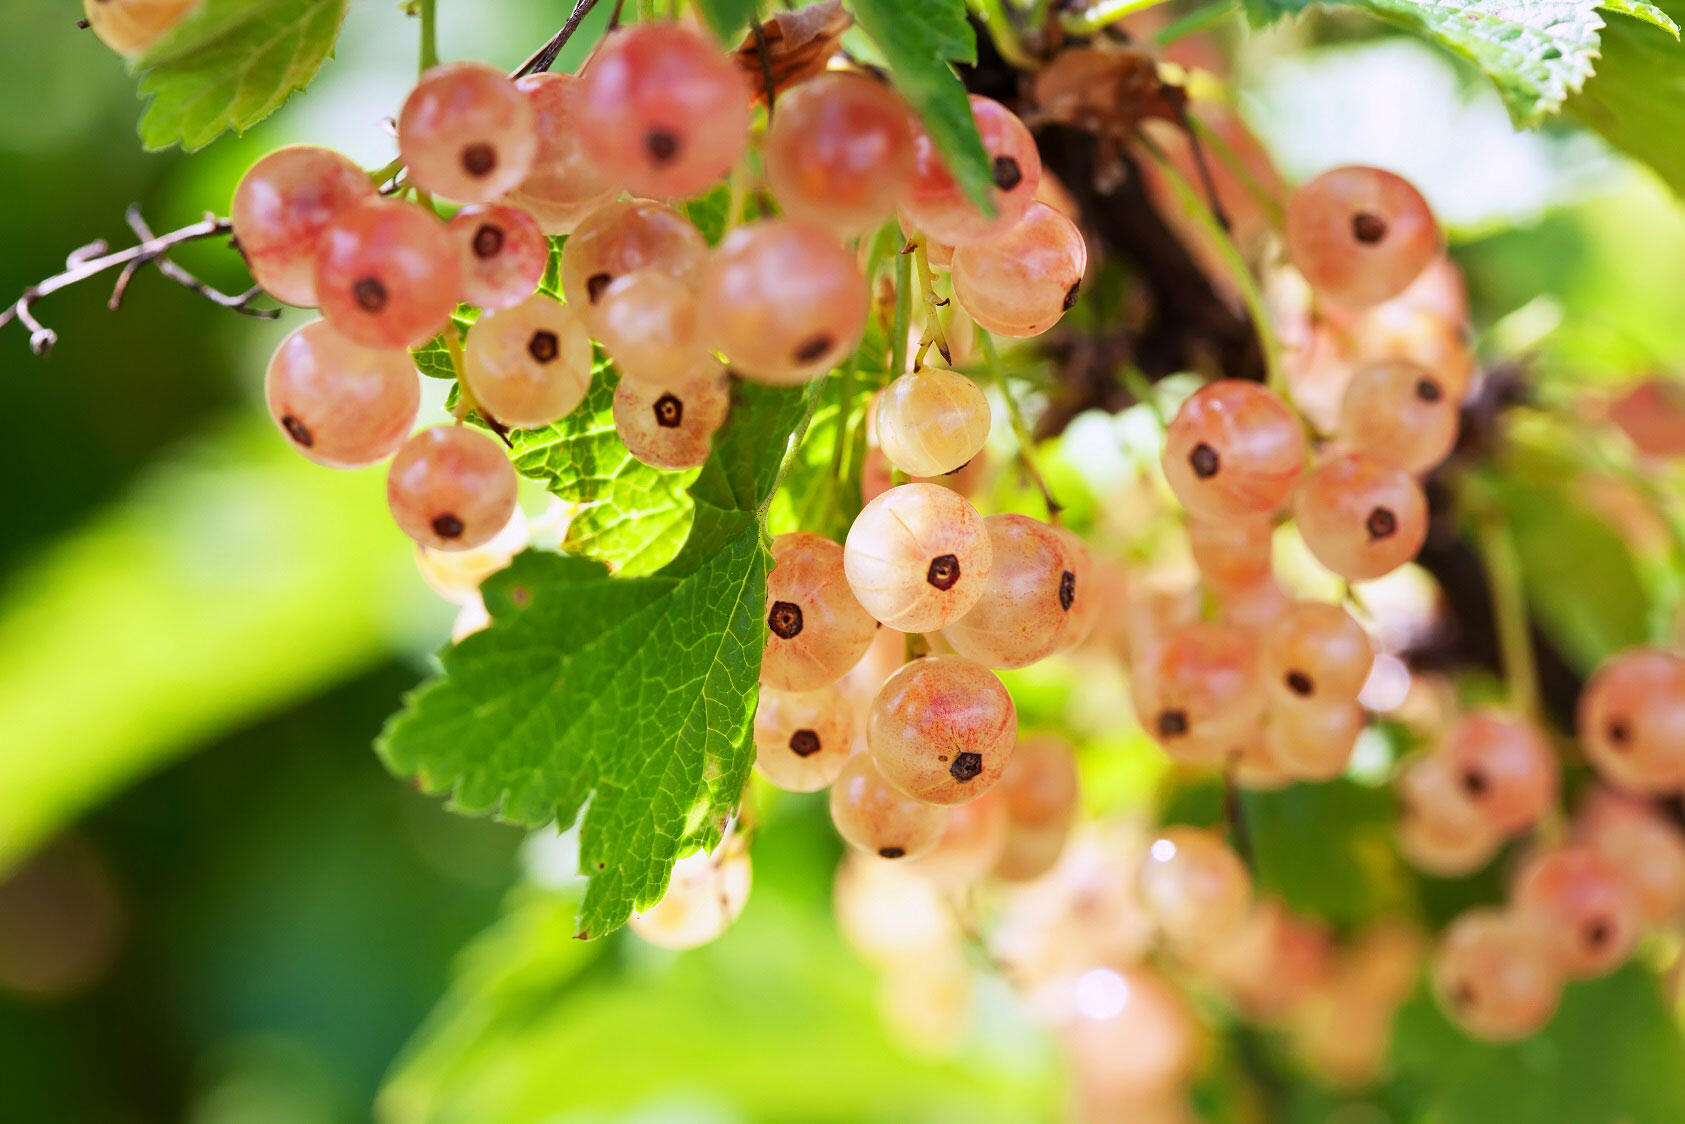 nelson_garden_how_to_prune_currant_bushes_and_apple_trees_blog_post_image_3.jpeg